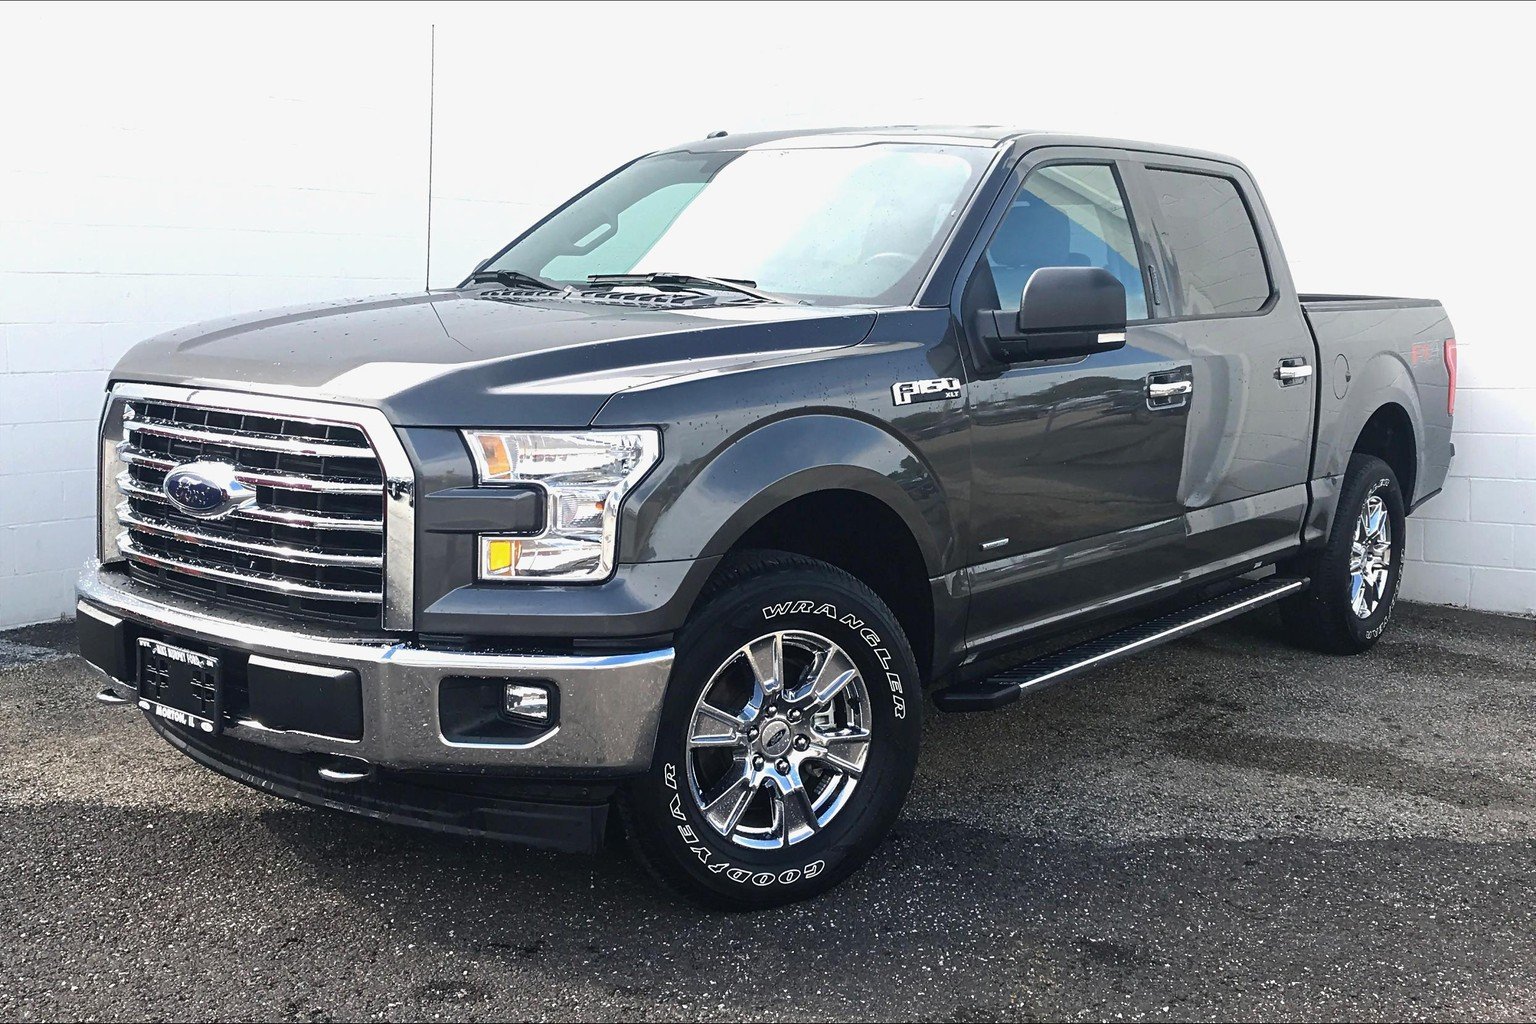 Pre-Owned 2017 Ford F-150 XLT 4WD SuperCrew 5.5' Box 4D SuperCrew in 2017 F 150 Xlt Supercrew Towing Capacity